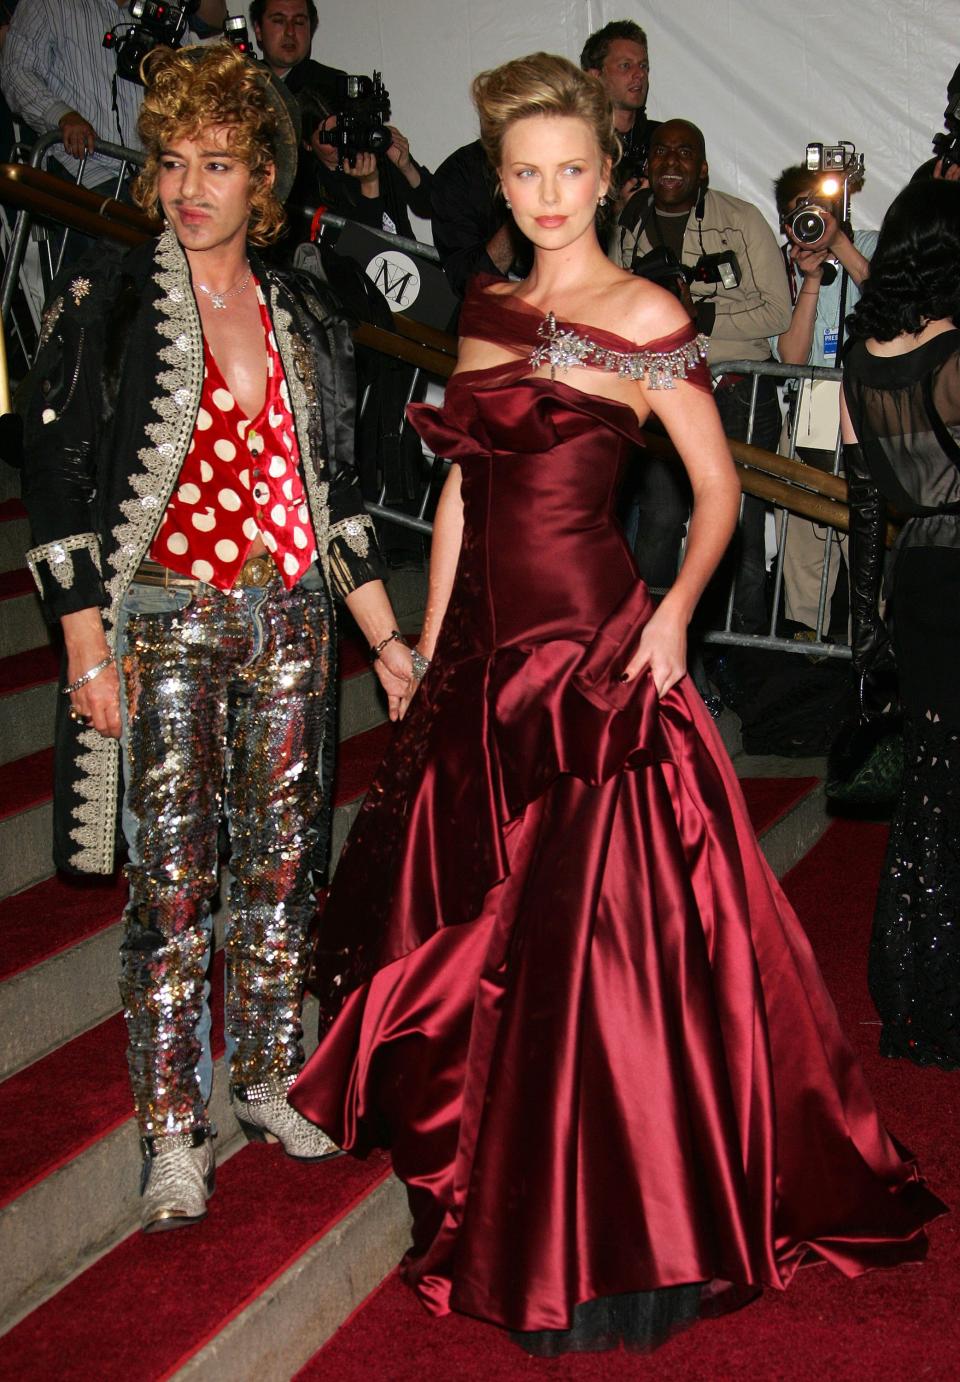 Designer John Galliano and Charlize Theron attend the 2006 Metropolitan Museum of Art Costume Institute Benefit Gala.